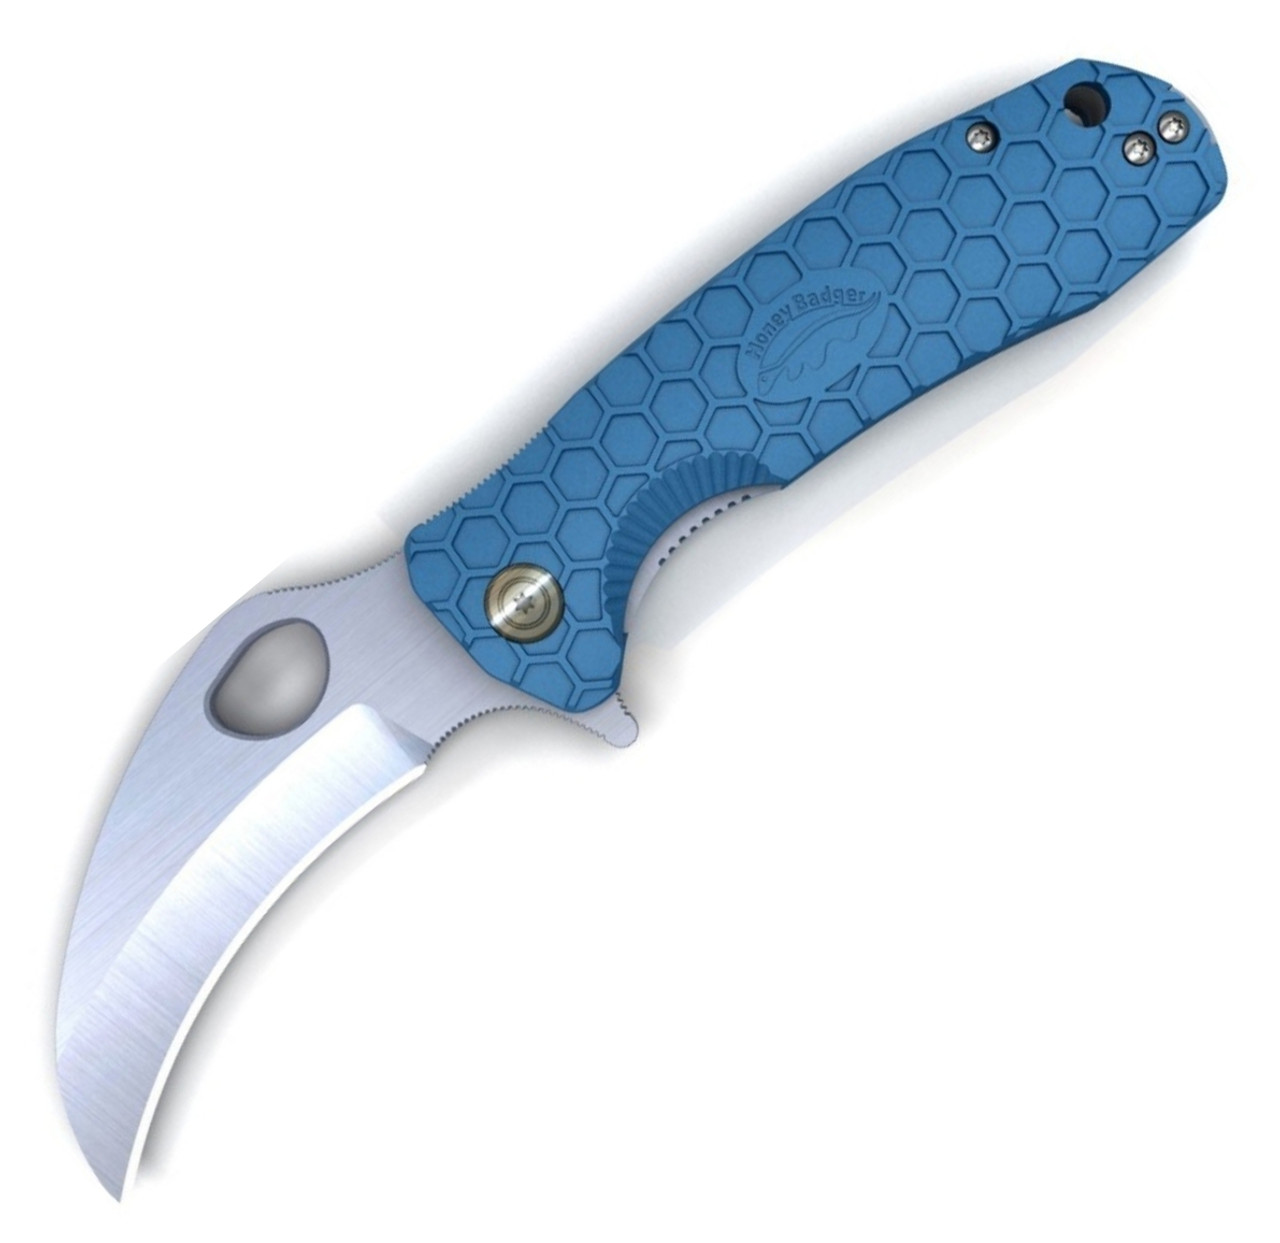 Honey Badger Knives Small Claw Flipper HB1144, 2.75" 8Cr13Mov Claw Plain Blade, Blue FRN Handle